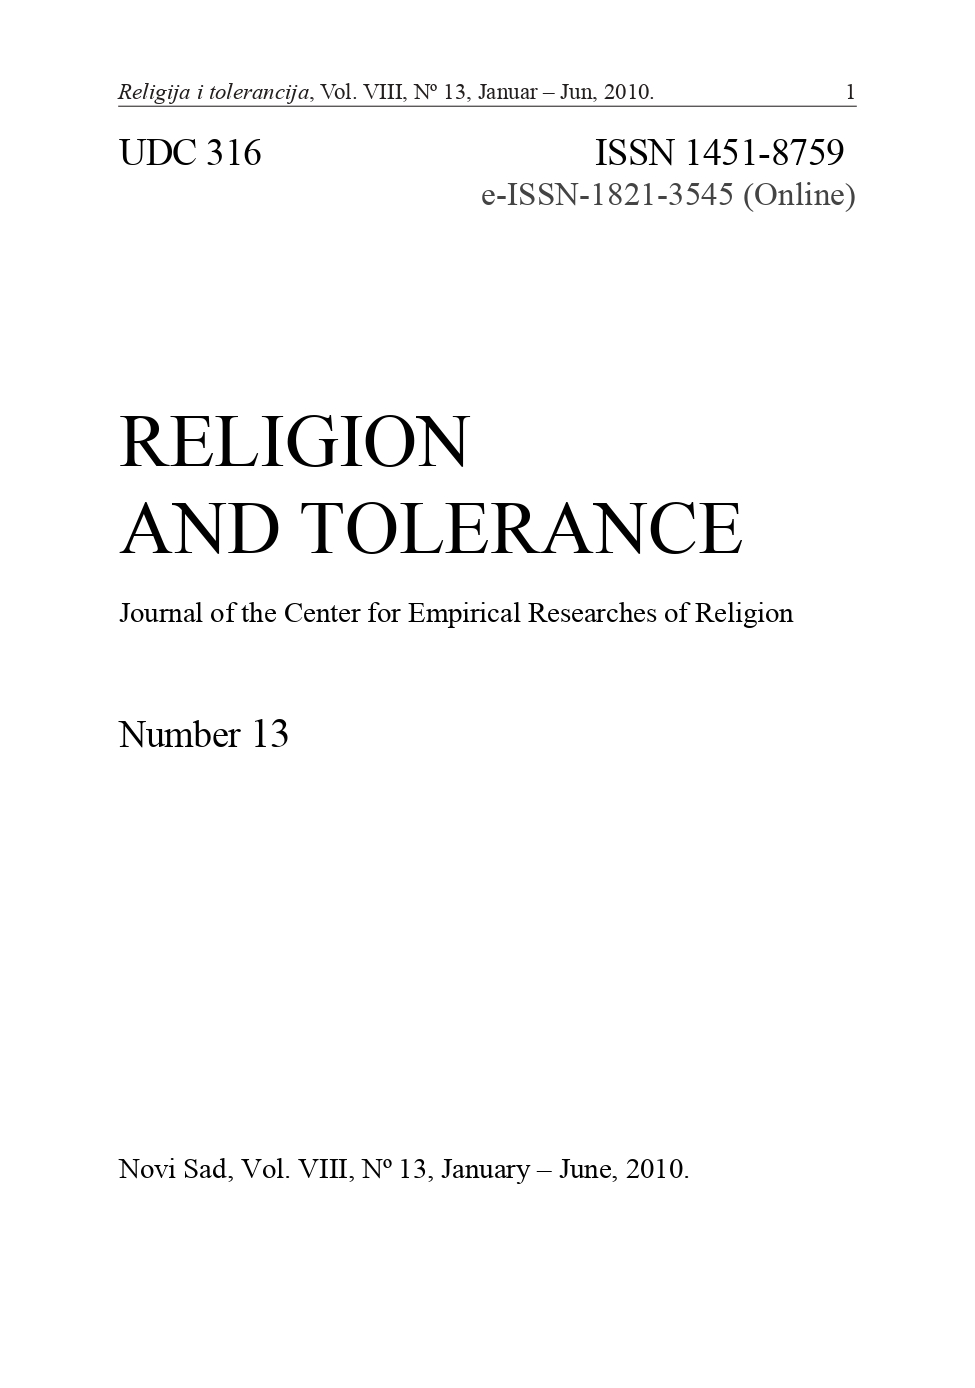 NEW RELIGIONS AND RELIGIOUS MOVEMENTS AS AN EXPRESSION OF THE POSTMODERN SUBCULTURE AND COUNTERCULTURE IN THE CONTEMPORARY WORLD Cover Image